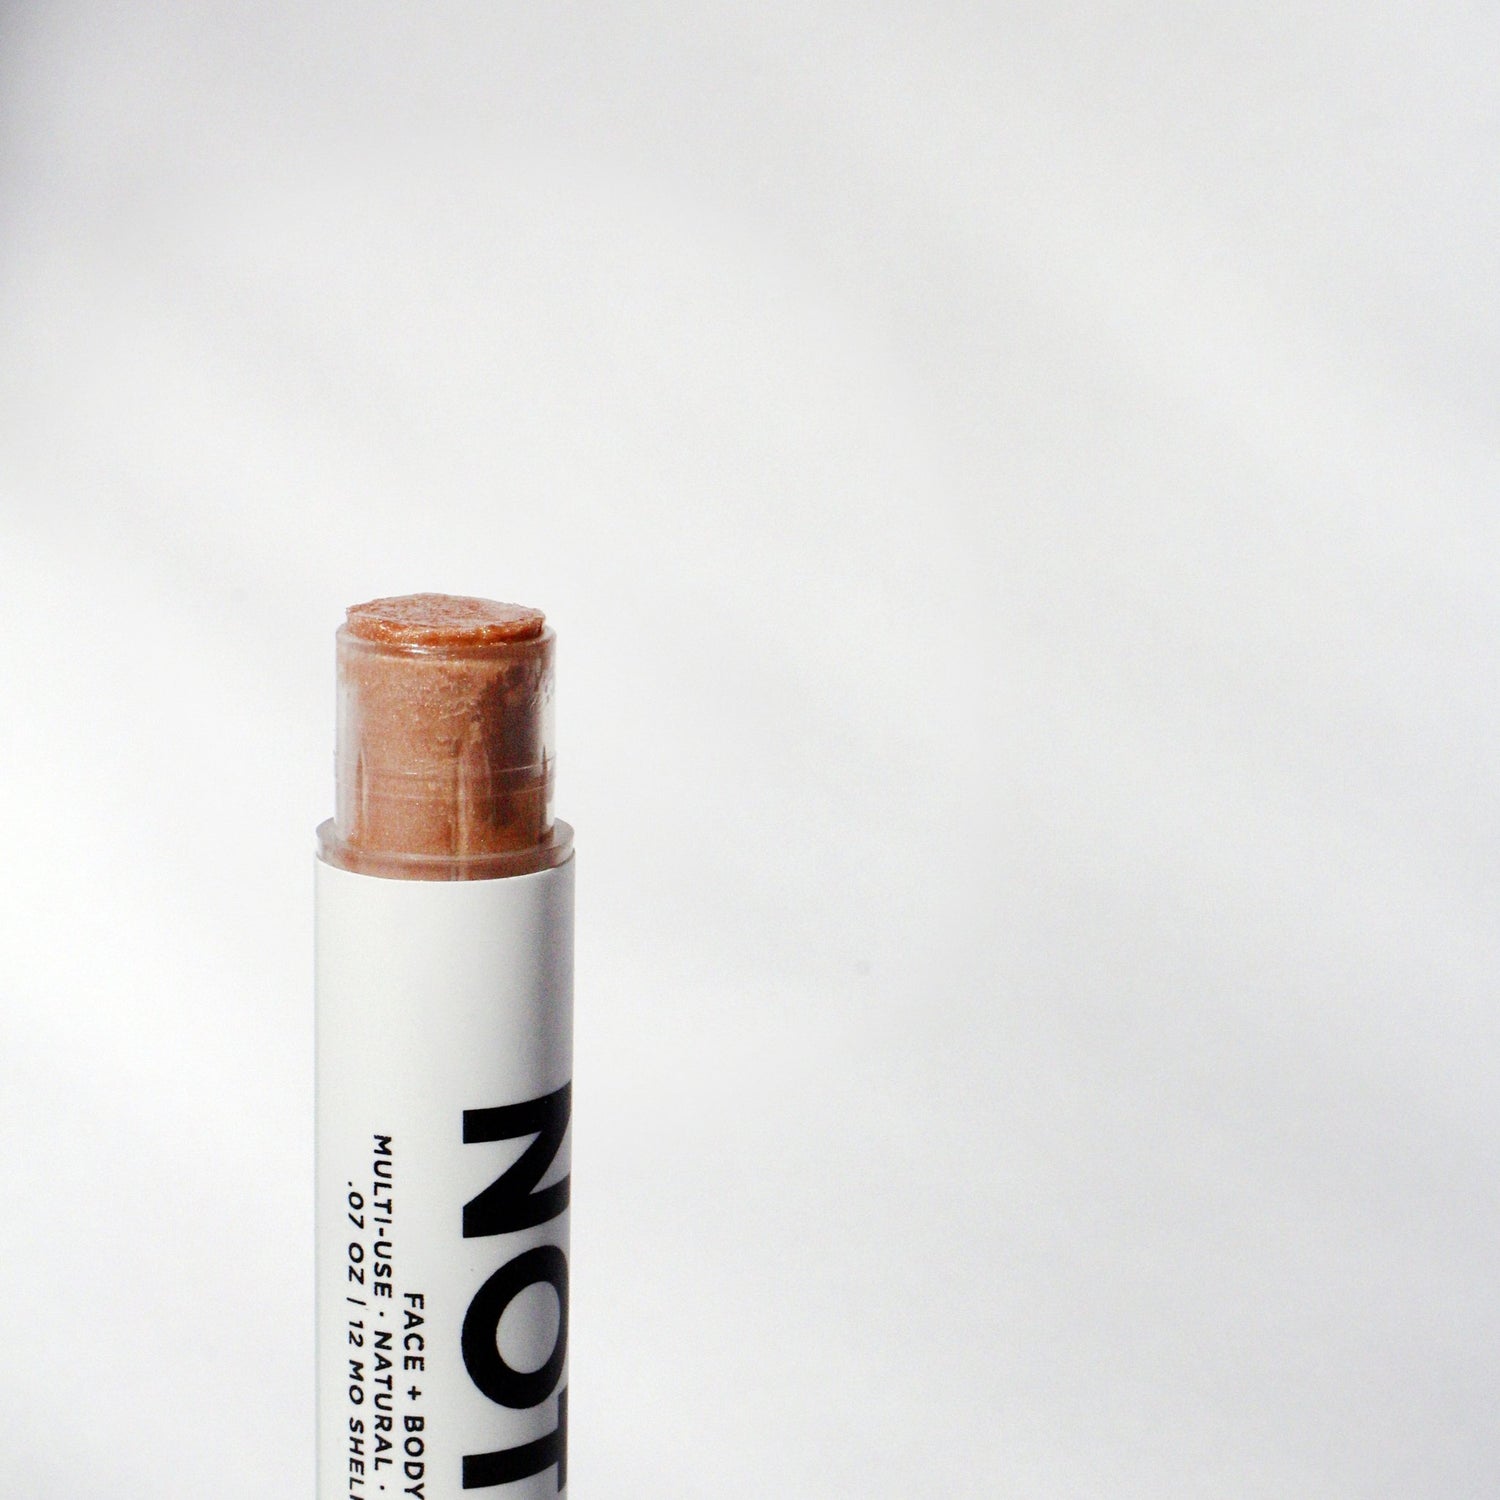 NOTO Hydra Highlighter Stick - The Slow Clinic